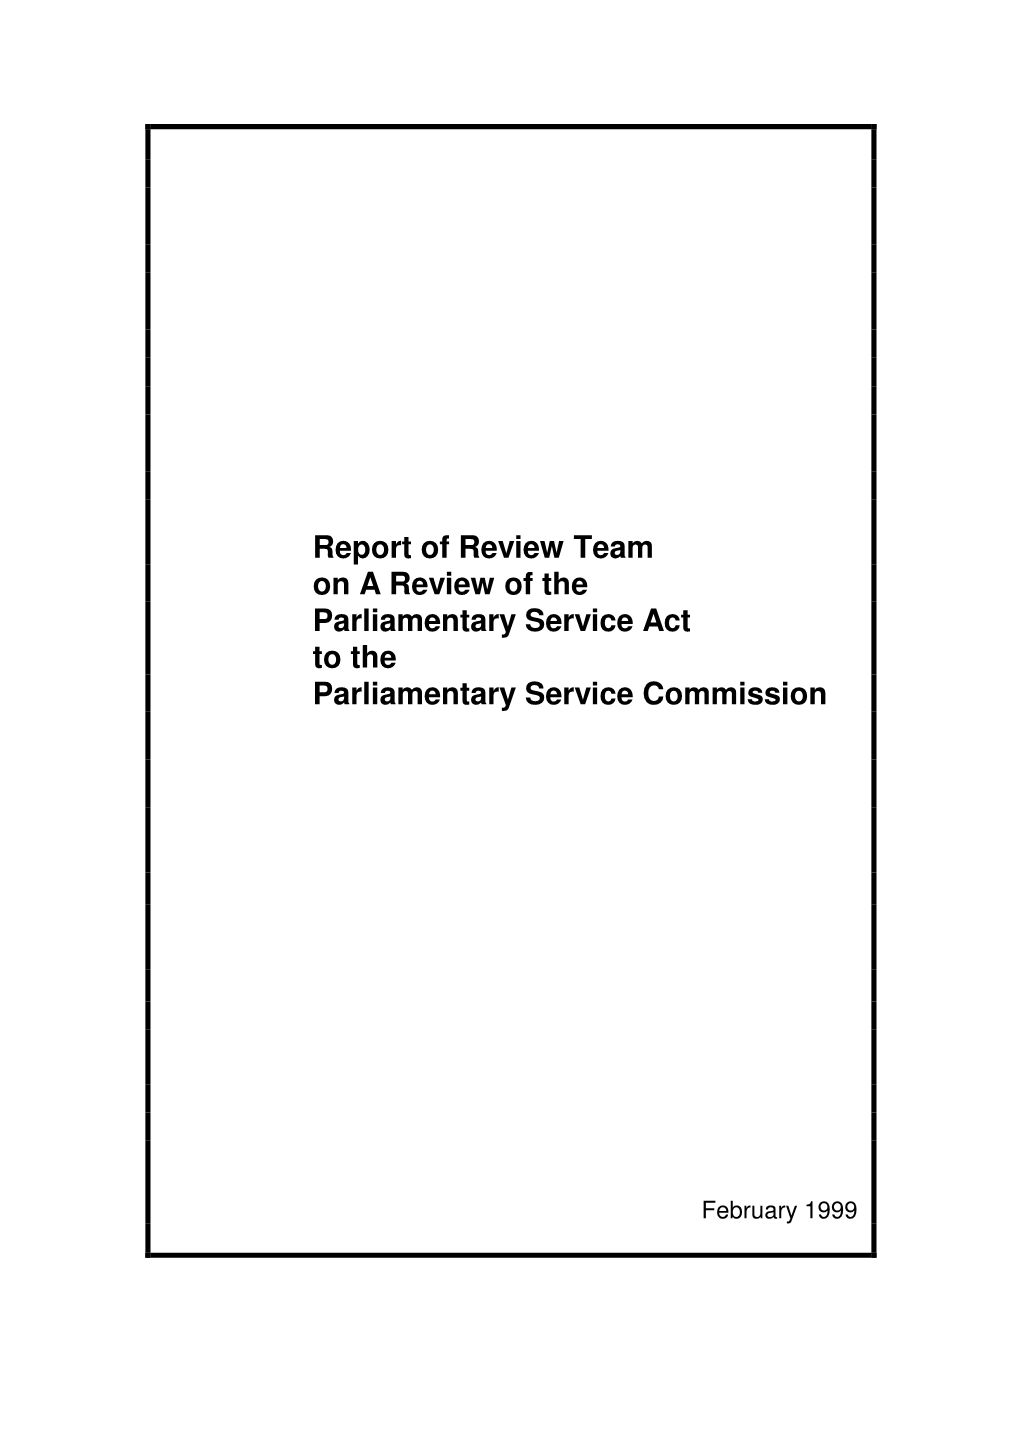 Report of Review Team on a Review of the Parliamentary Service Act to the Parliamentary Service Commission